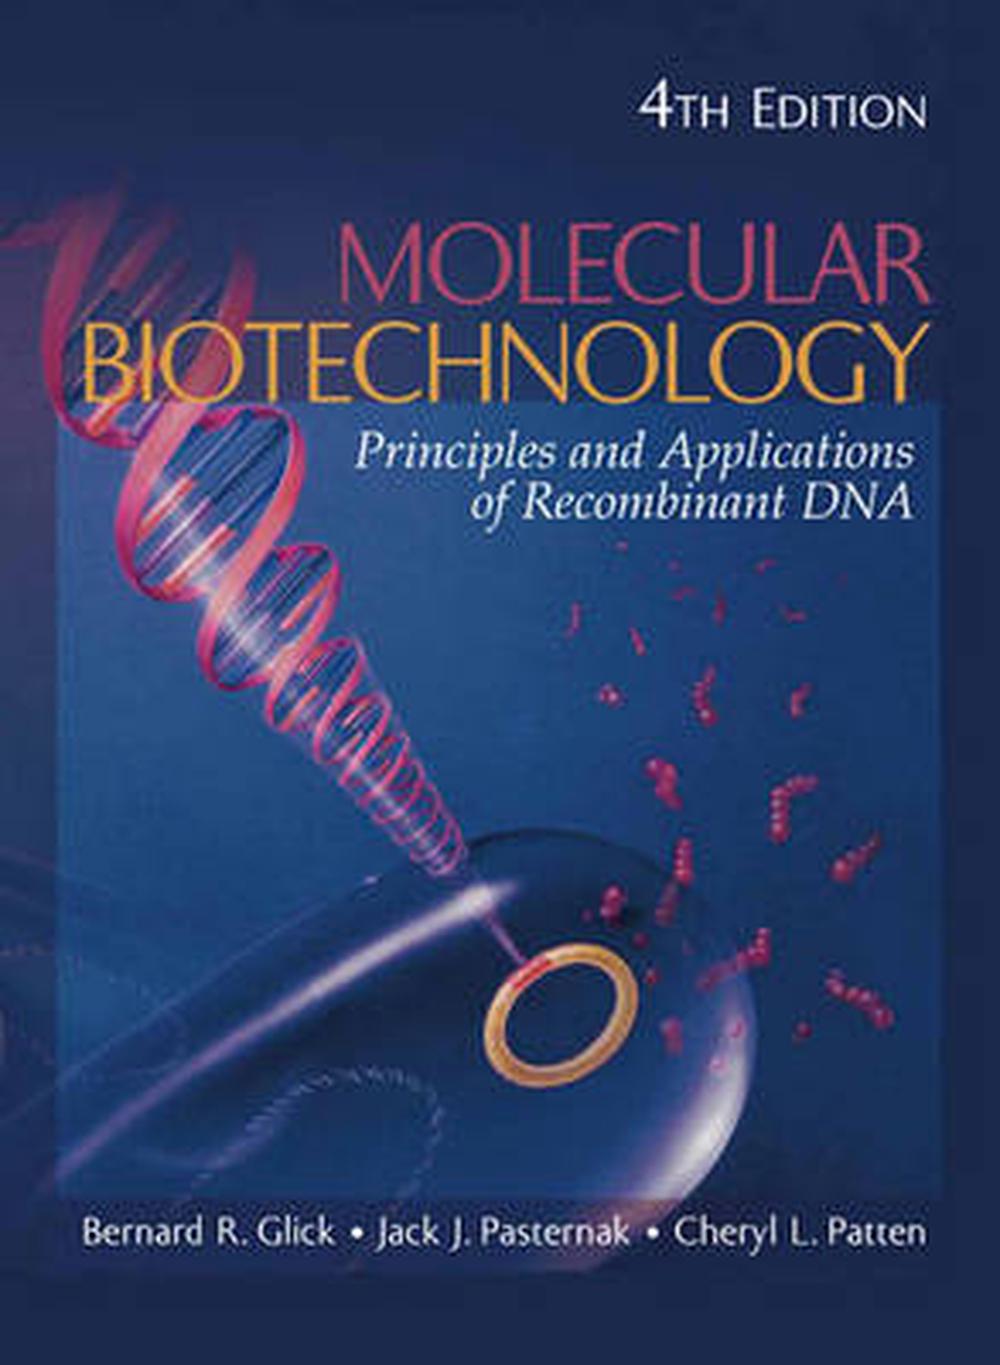 Molecular Biotechnology Principles and Applications of DNA